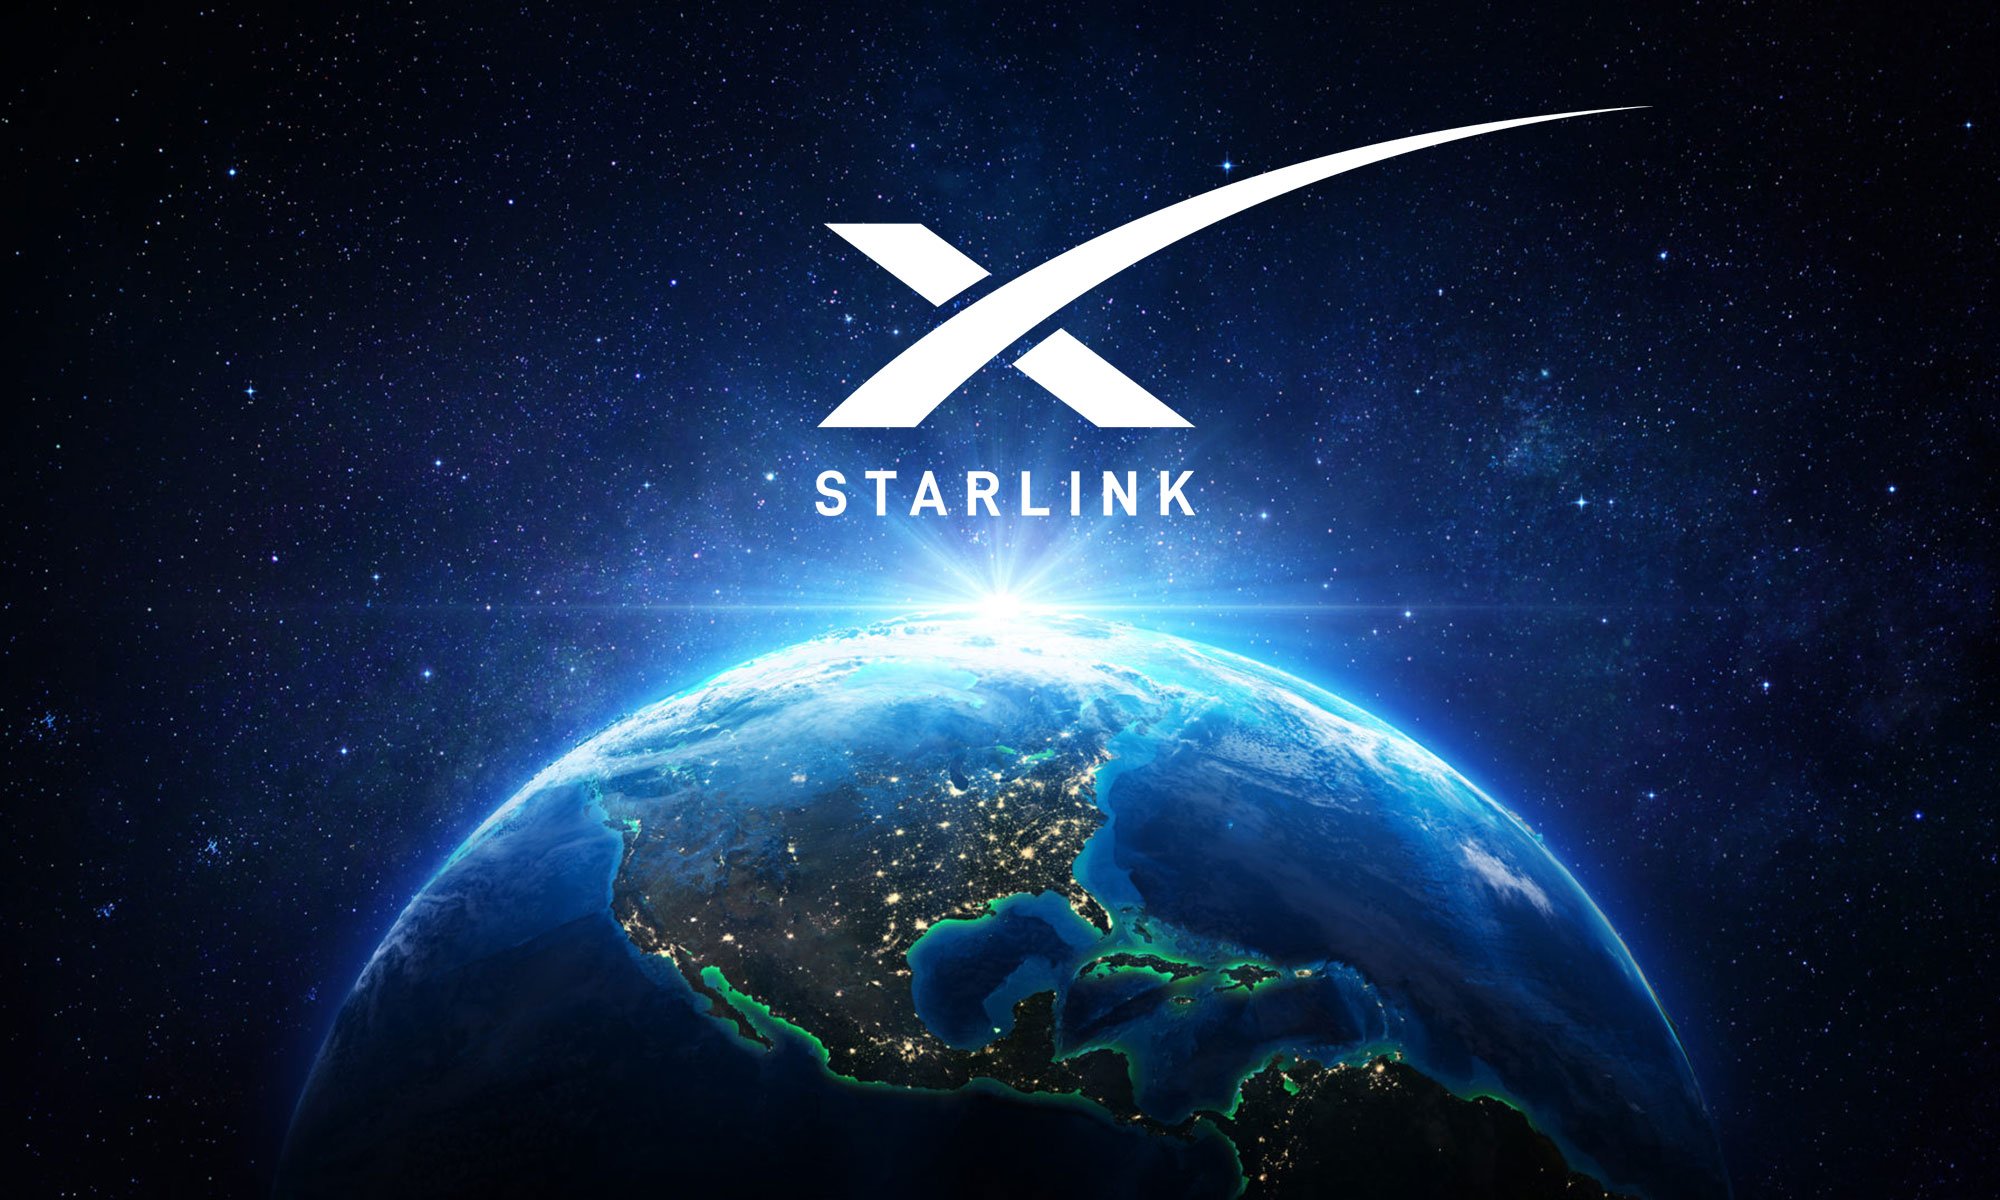 Elon Musk spoke about the new launch dates for the satellite Internet Starlink